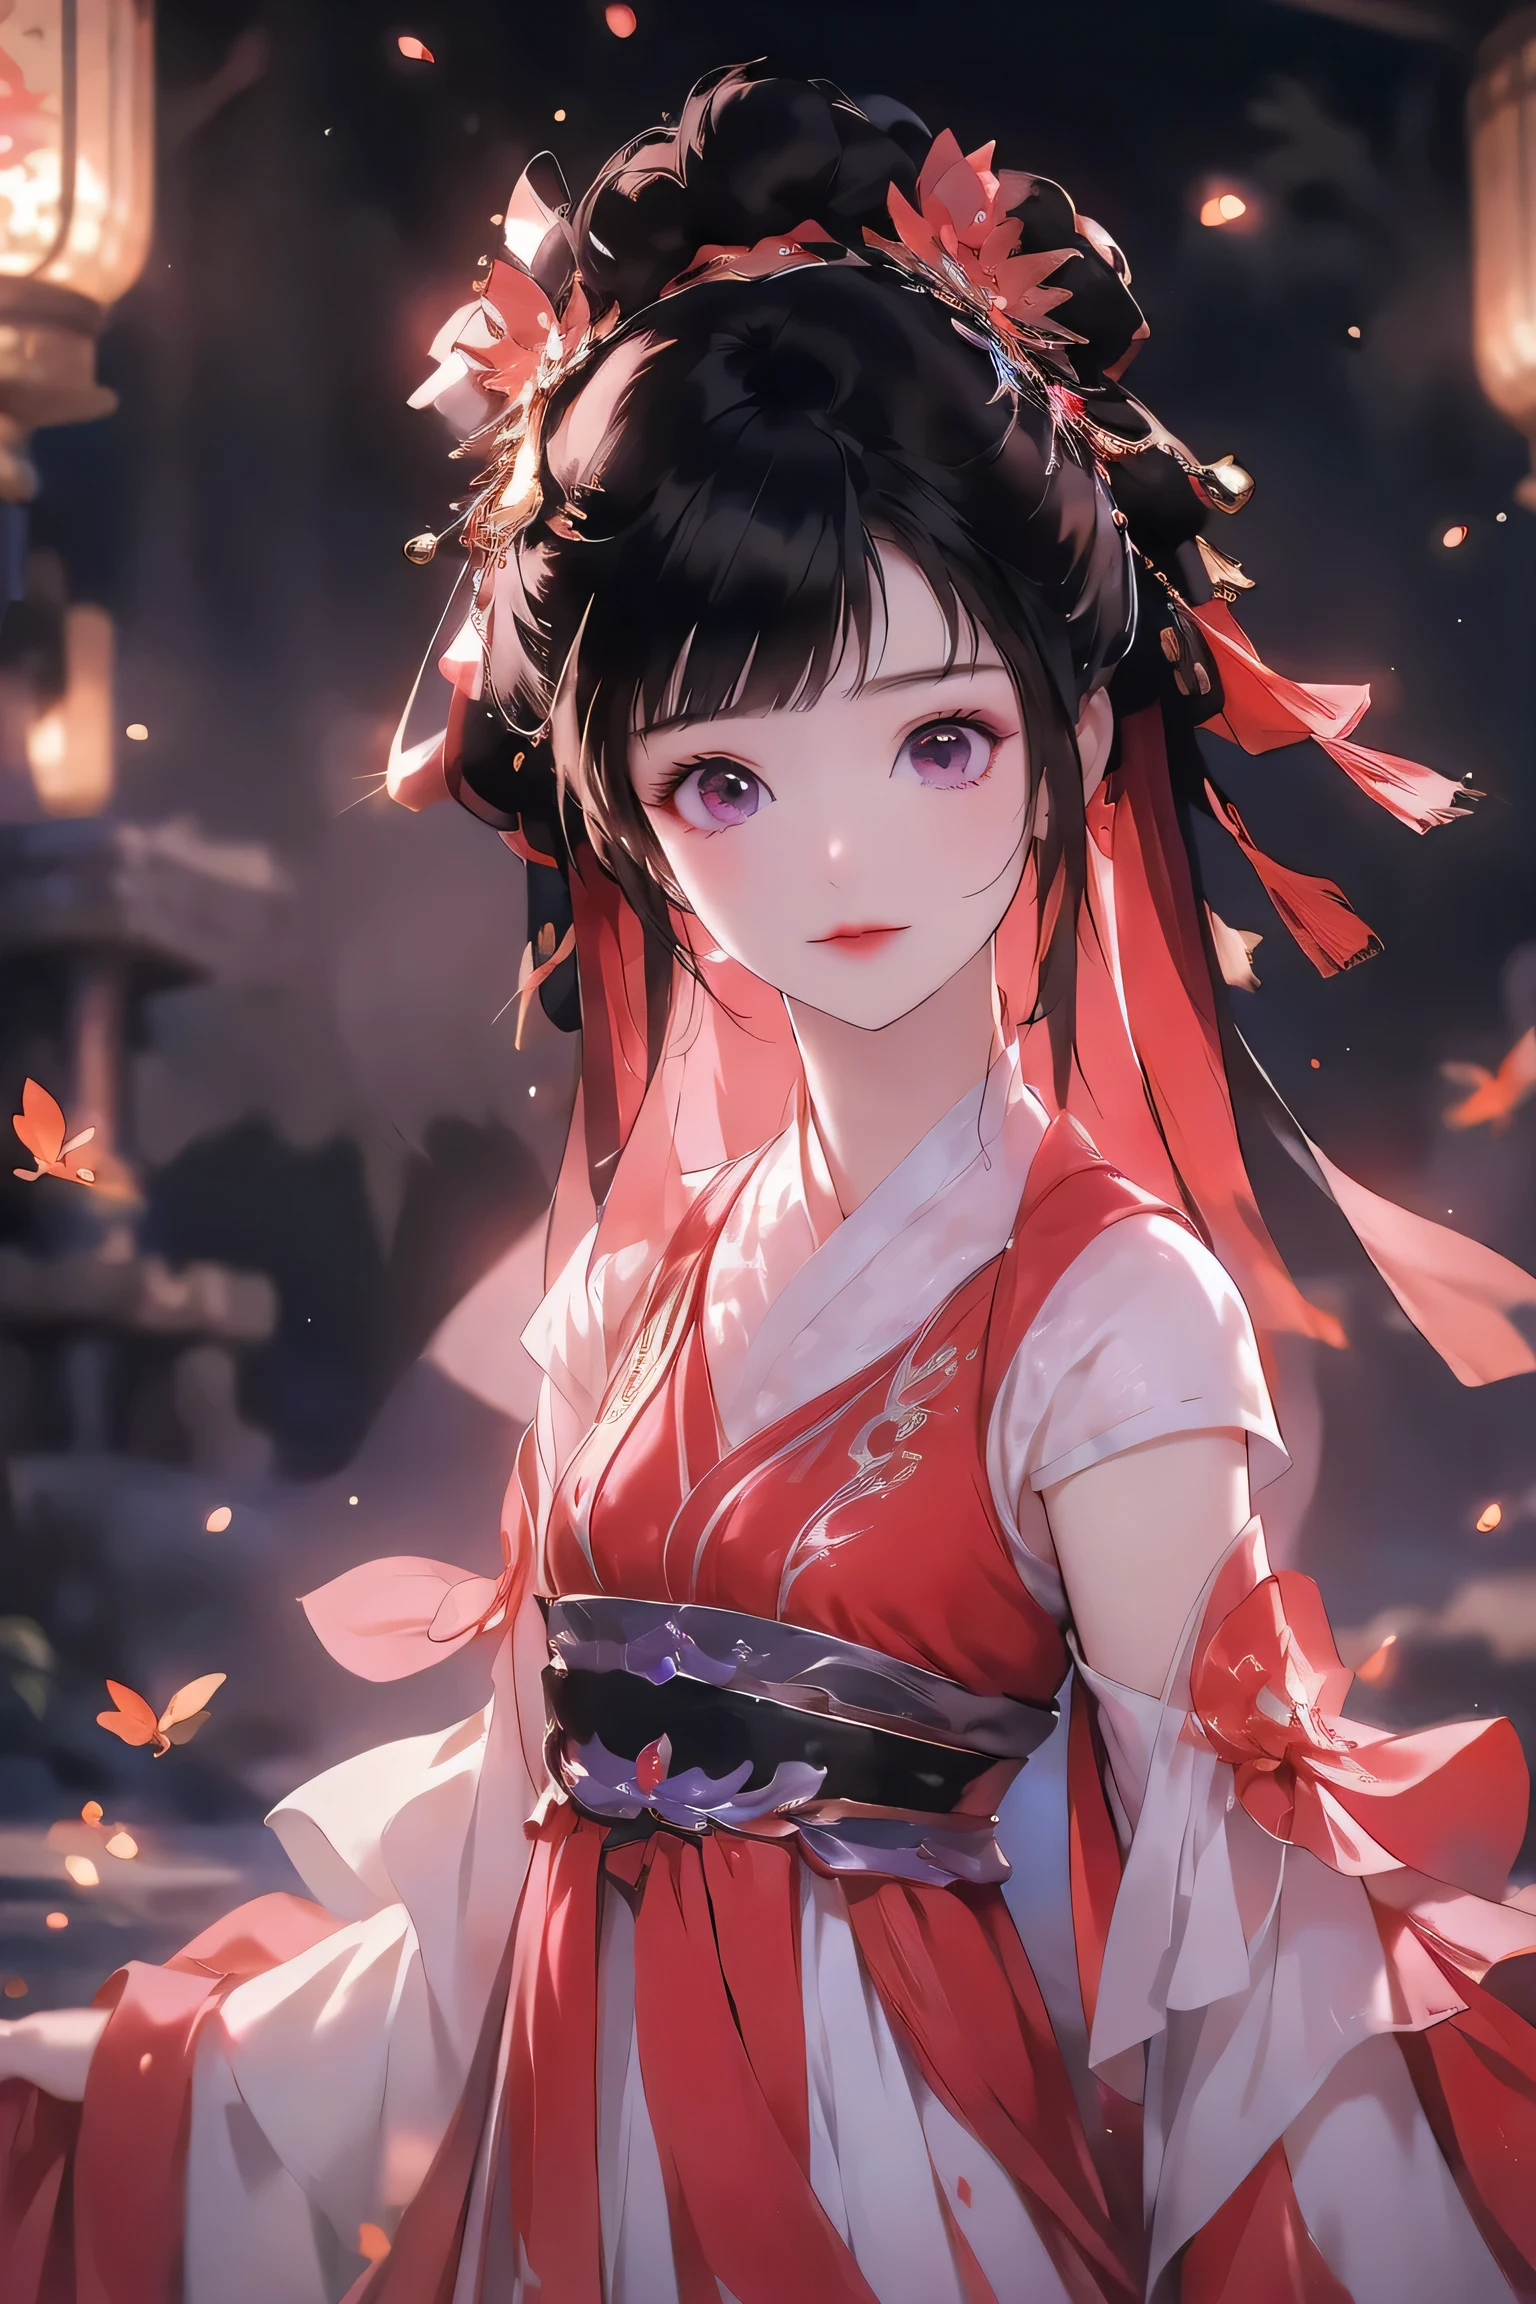 1 girl, a cute , has long black hair, bright purple eyes, smiling girl, girl wearing red hanfu,A cheerful girl, around her there are glowing butterflies,Cheerful, lively atmosphere, beautiful, sweet